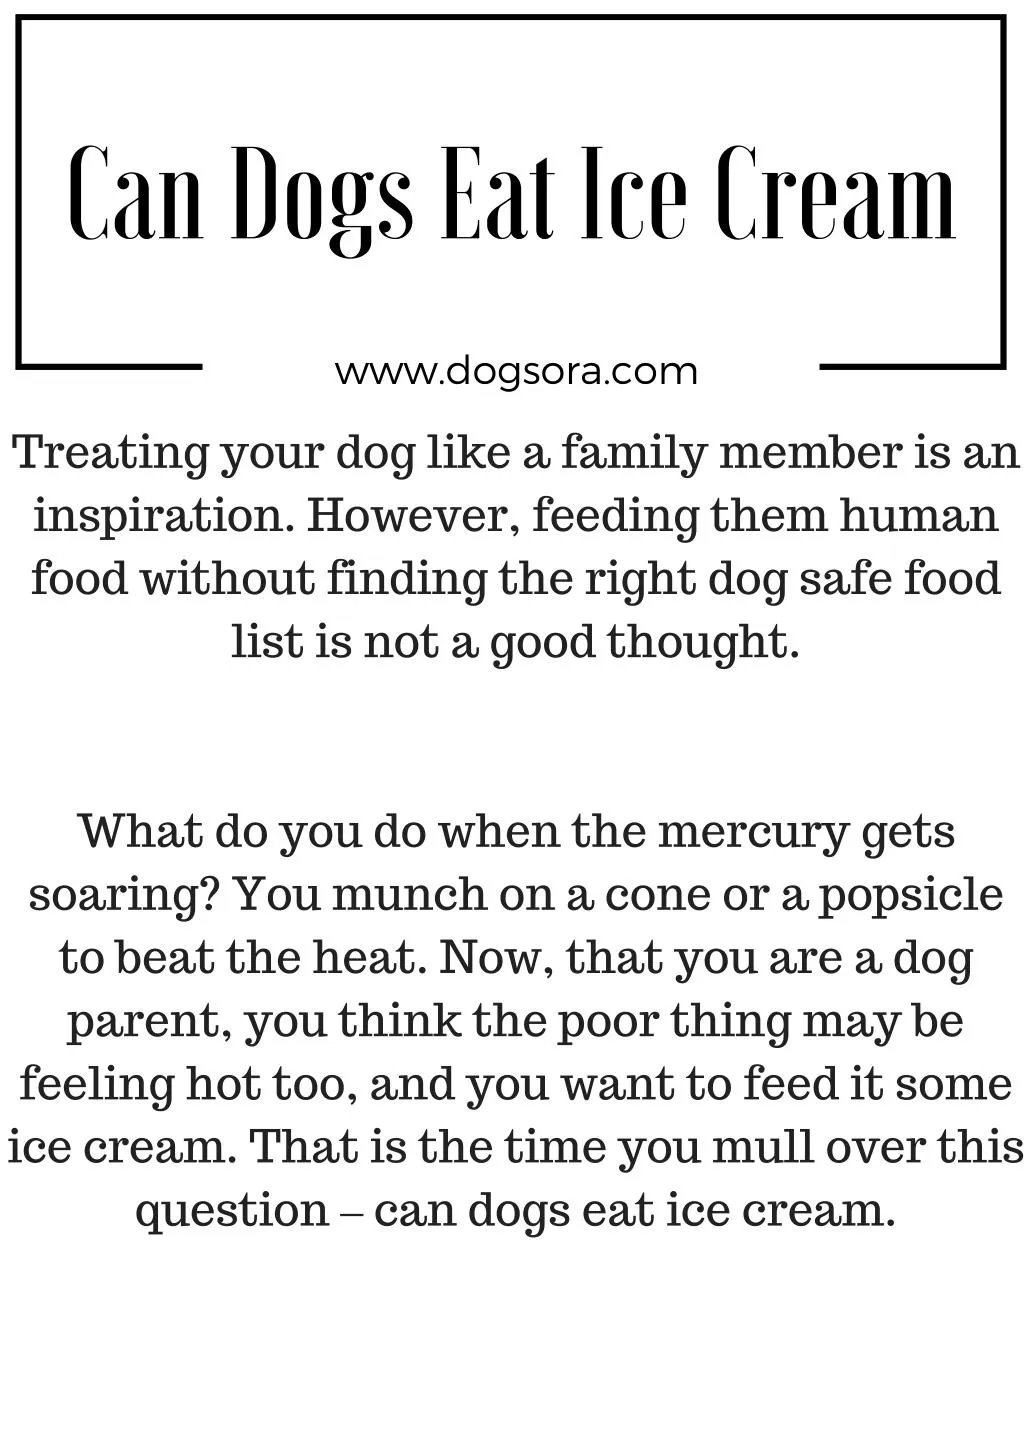 can dogs ea t ice cream